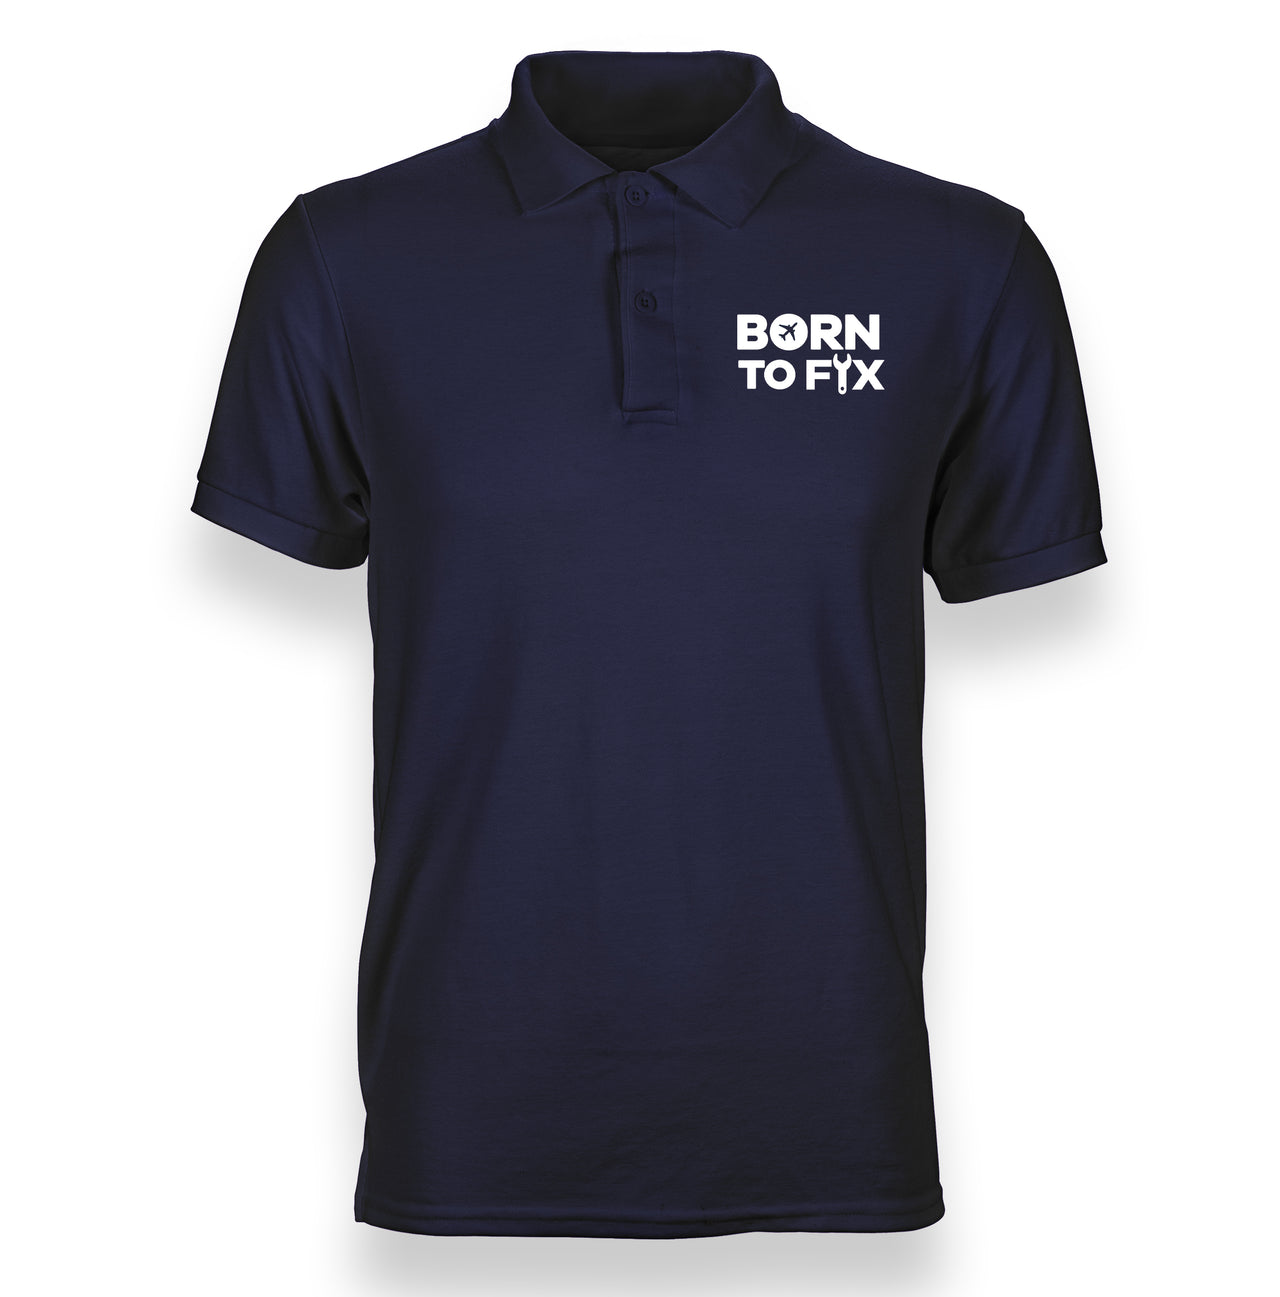 Born To Fix Airplanes Designed "WOMEN" Polo T-Shirts